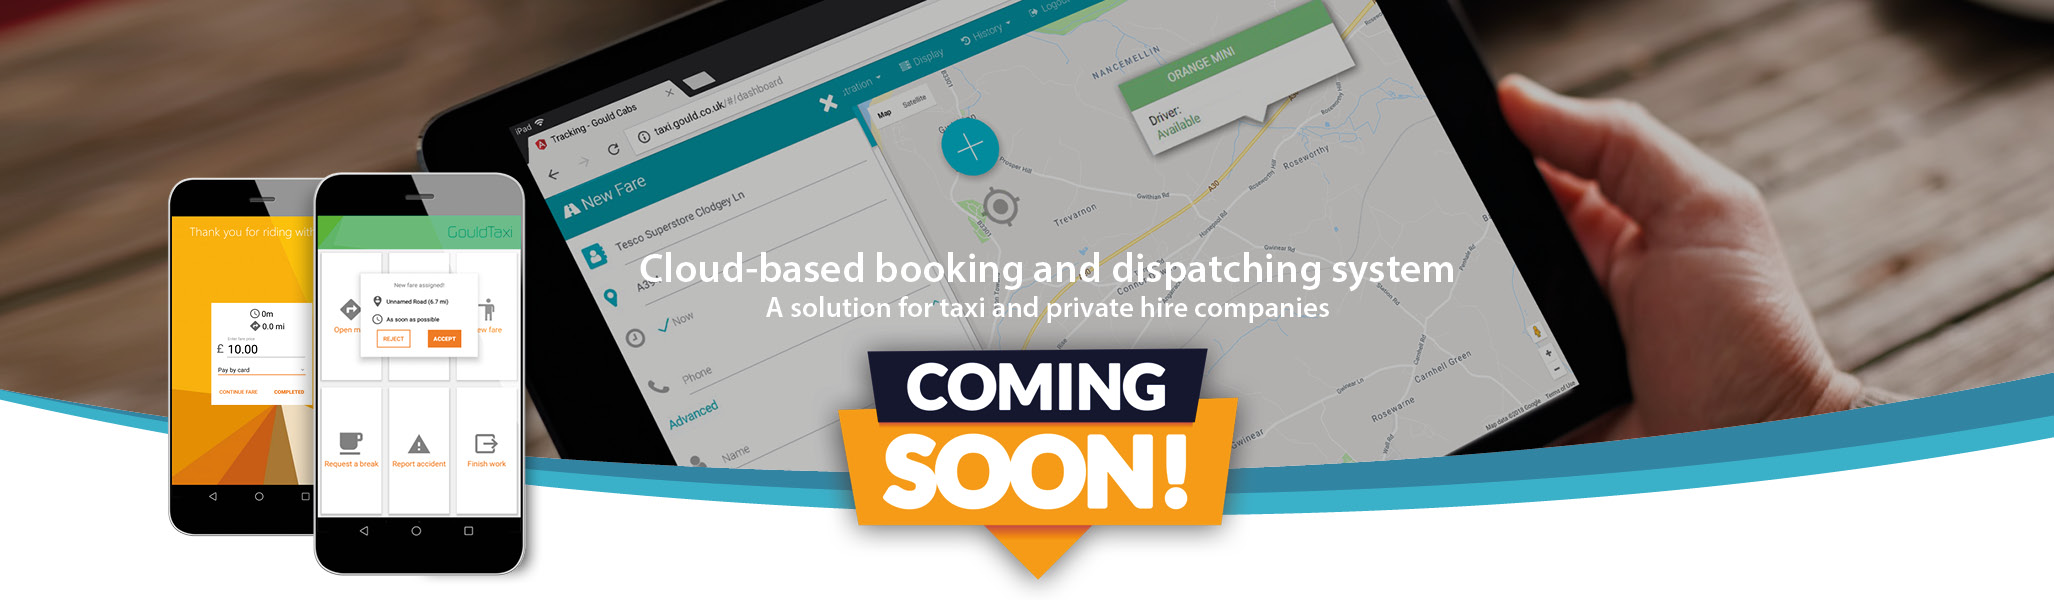 taxi-booking-system-banner.jpg